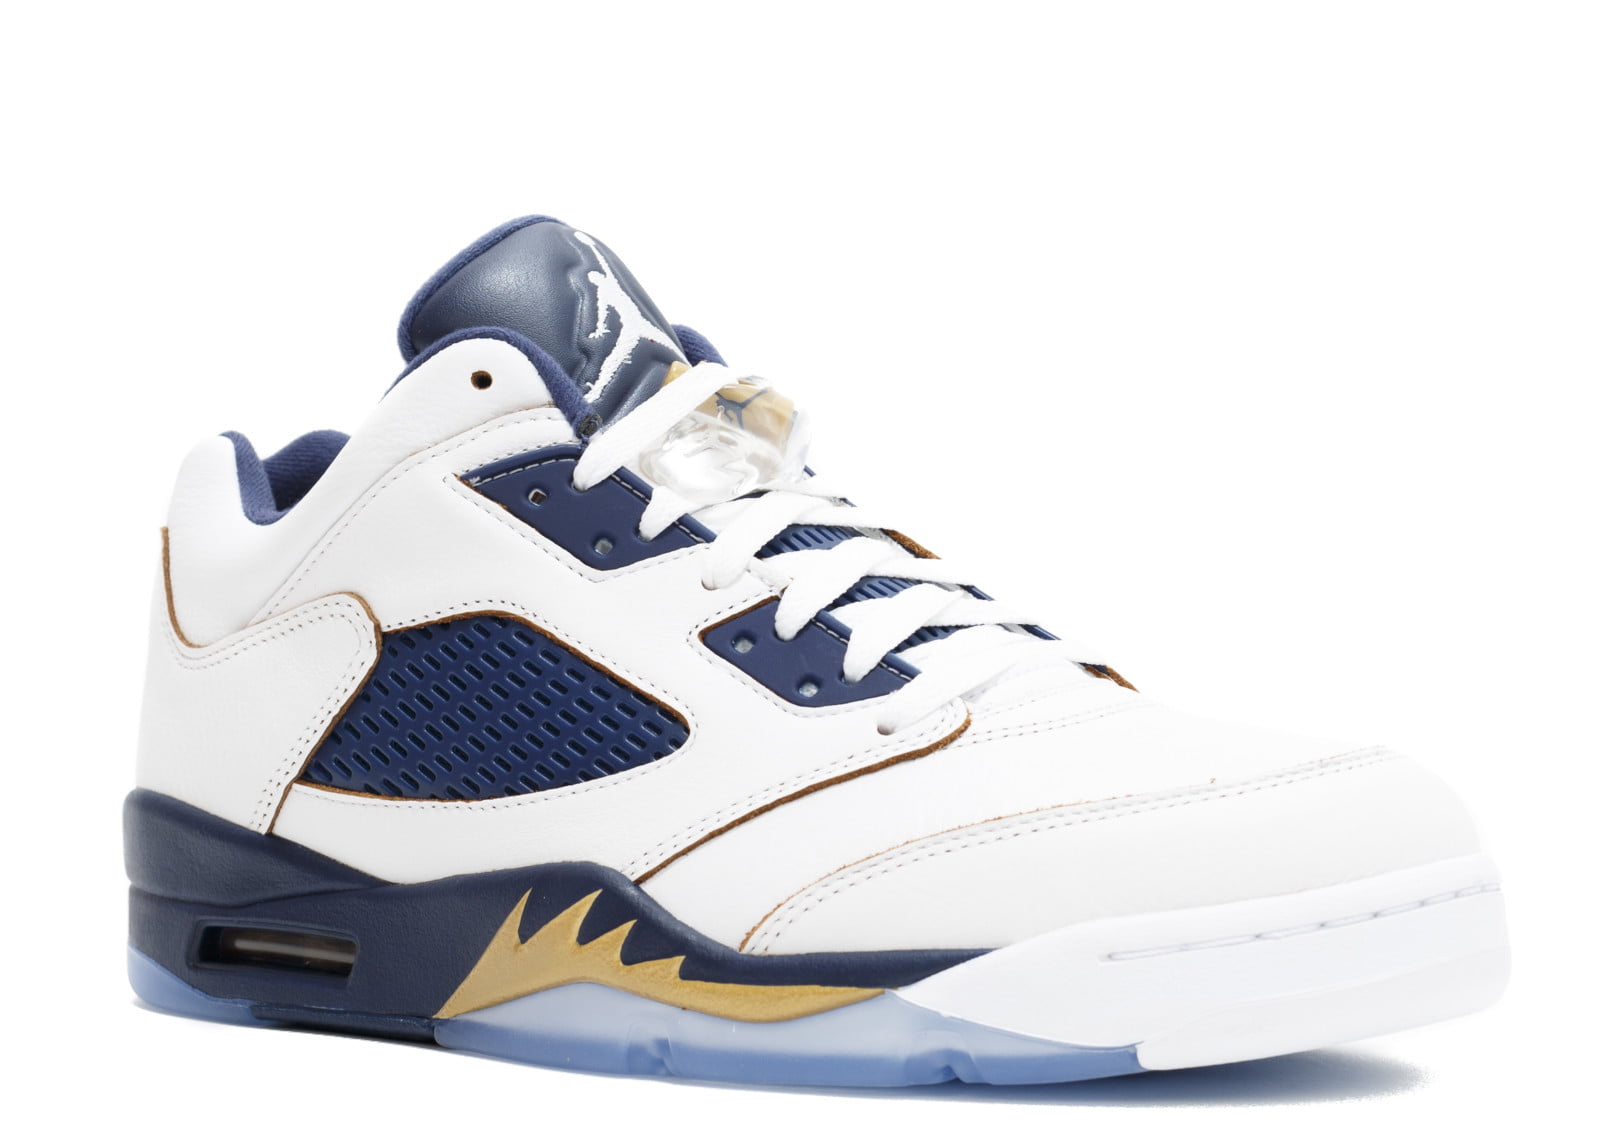 jordan 5 low dunk from above